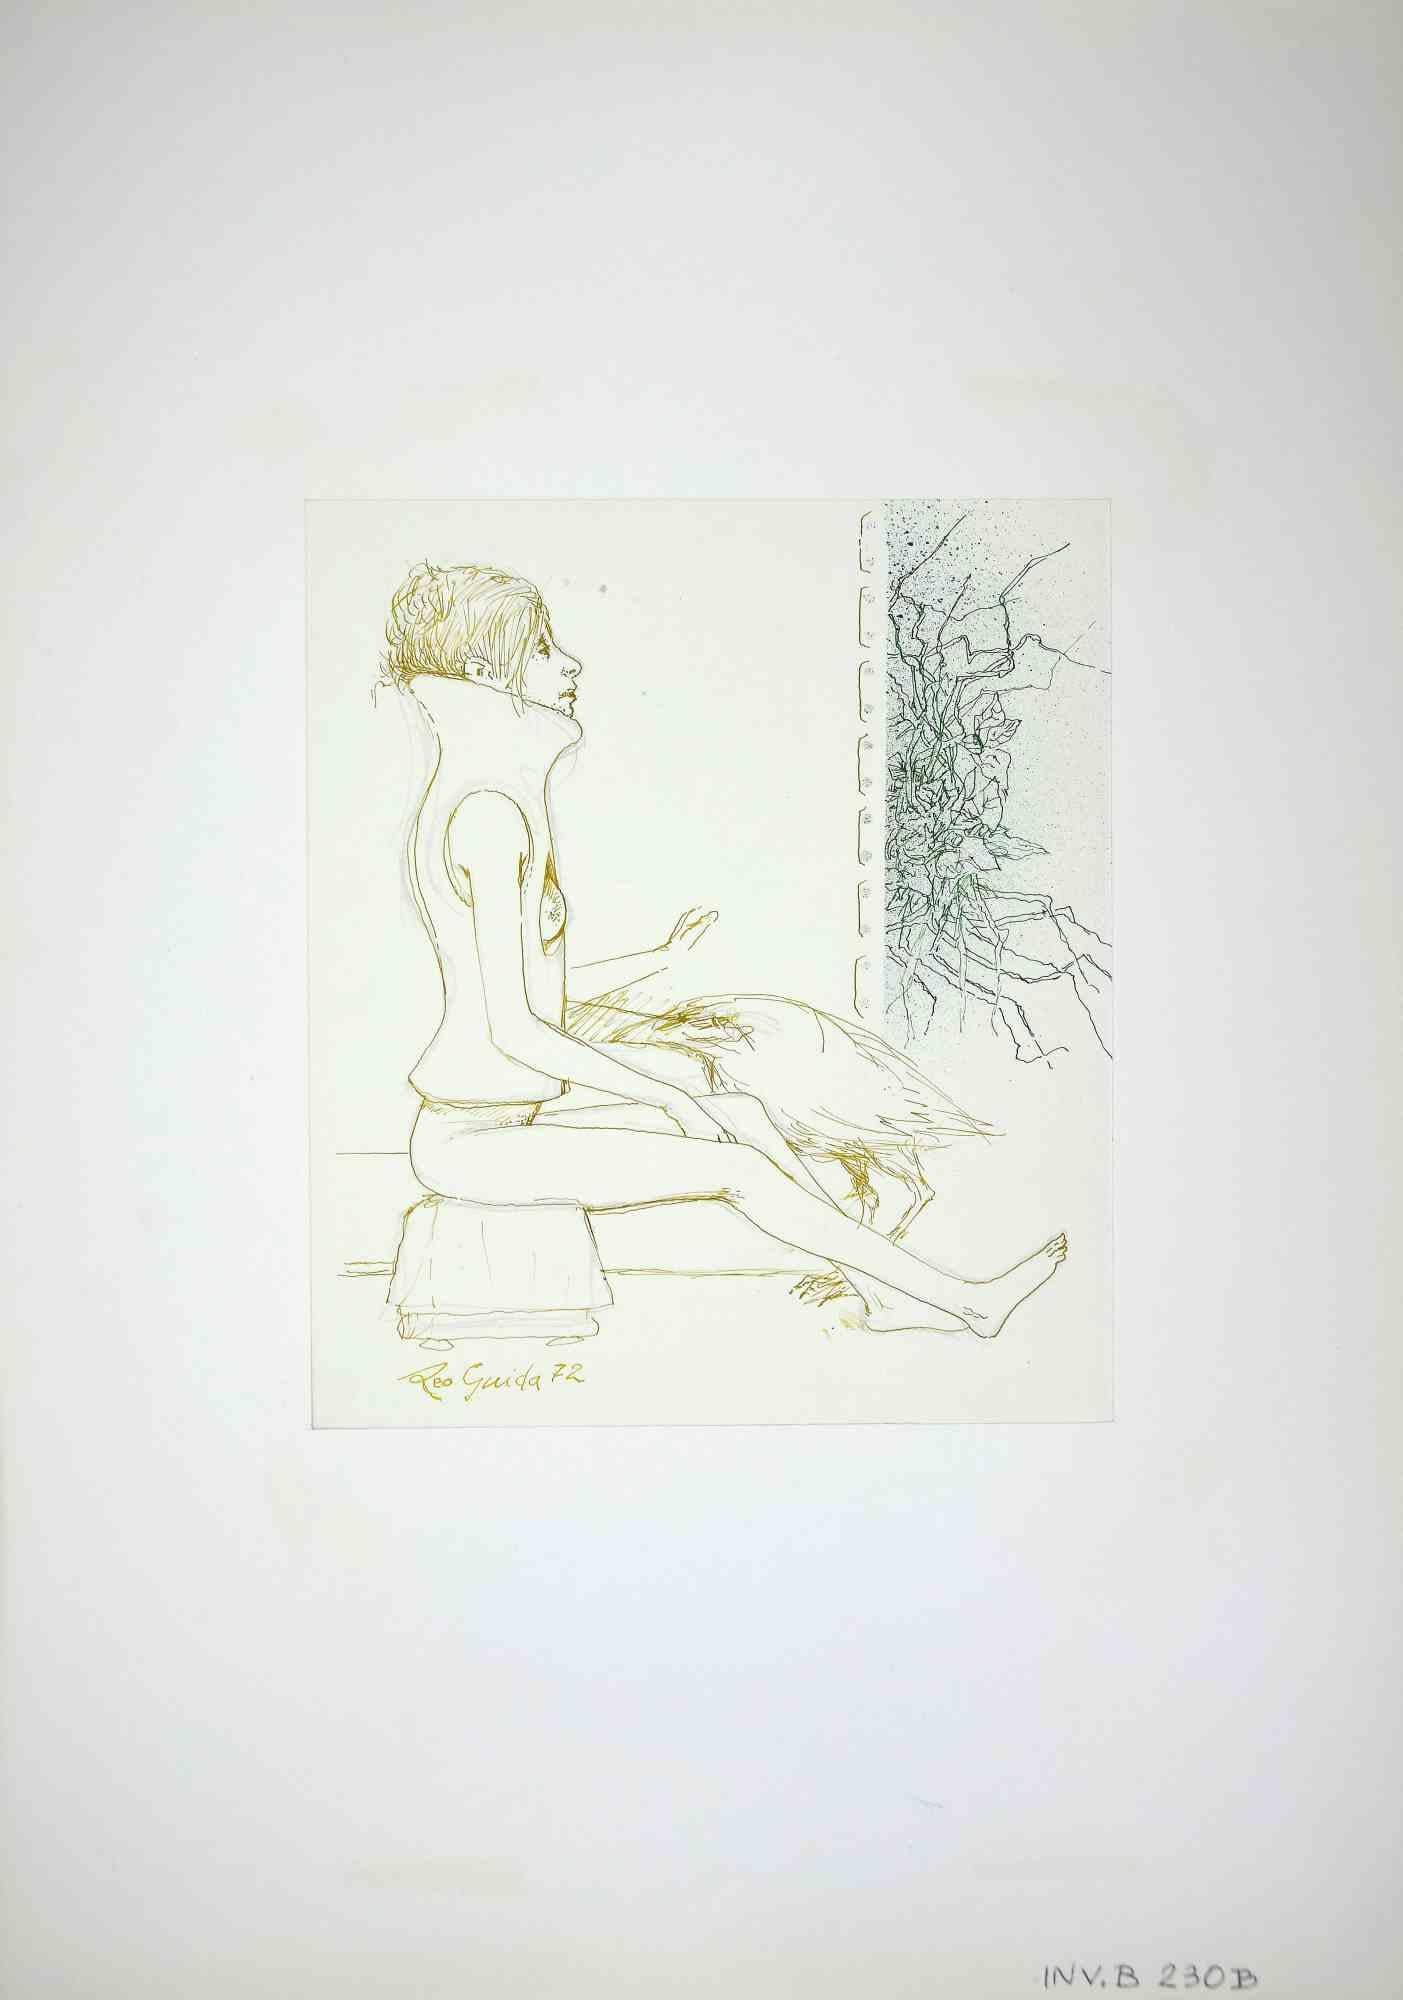 Woman is an original drawing in china ink realized by Leo Guida in 1972.

Good condition.

Leo Guida  (1992 - 2017). Sensitive to current issues, artistic movements and historical techniques, Leo Guida has been able to weave with many generations of